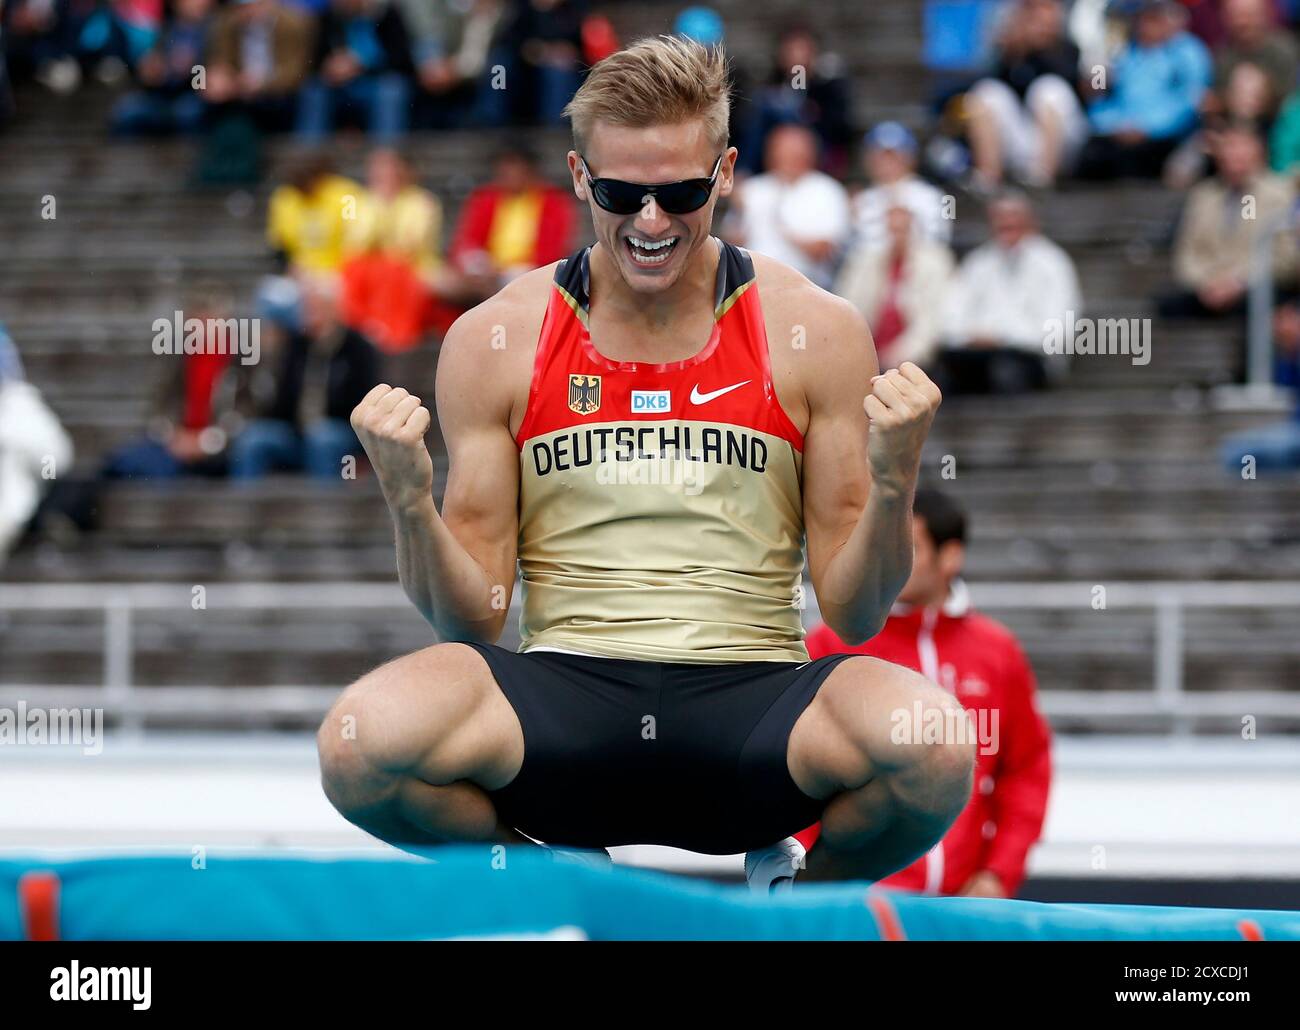 Pascal Behrenbruch of Germany reacts after clearing the bar during the pole  vault event of the men's decathlon at the European Athletics Championships  in Helsinki June 28, 2012. REUTERS/Dominic Ebenbichler (FINLAND -